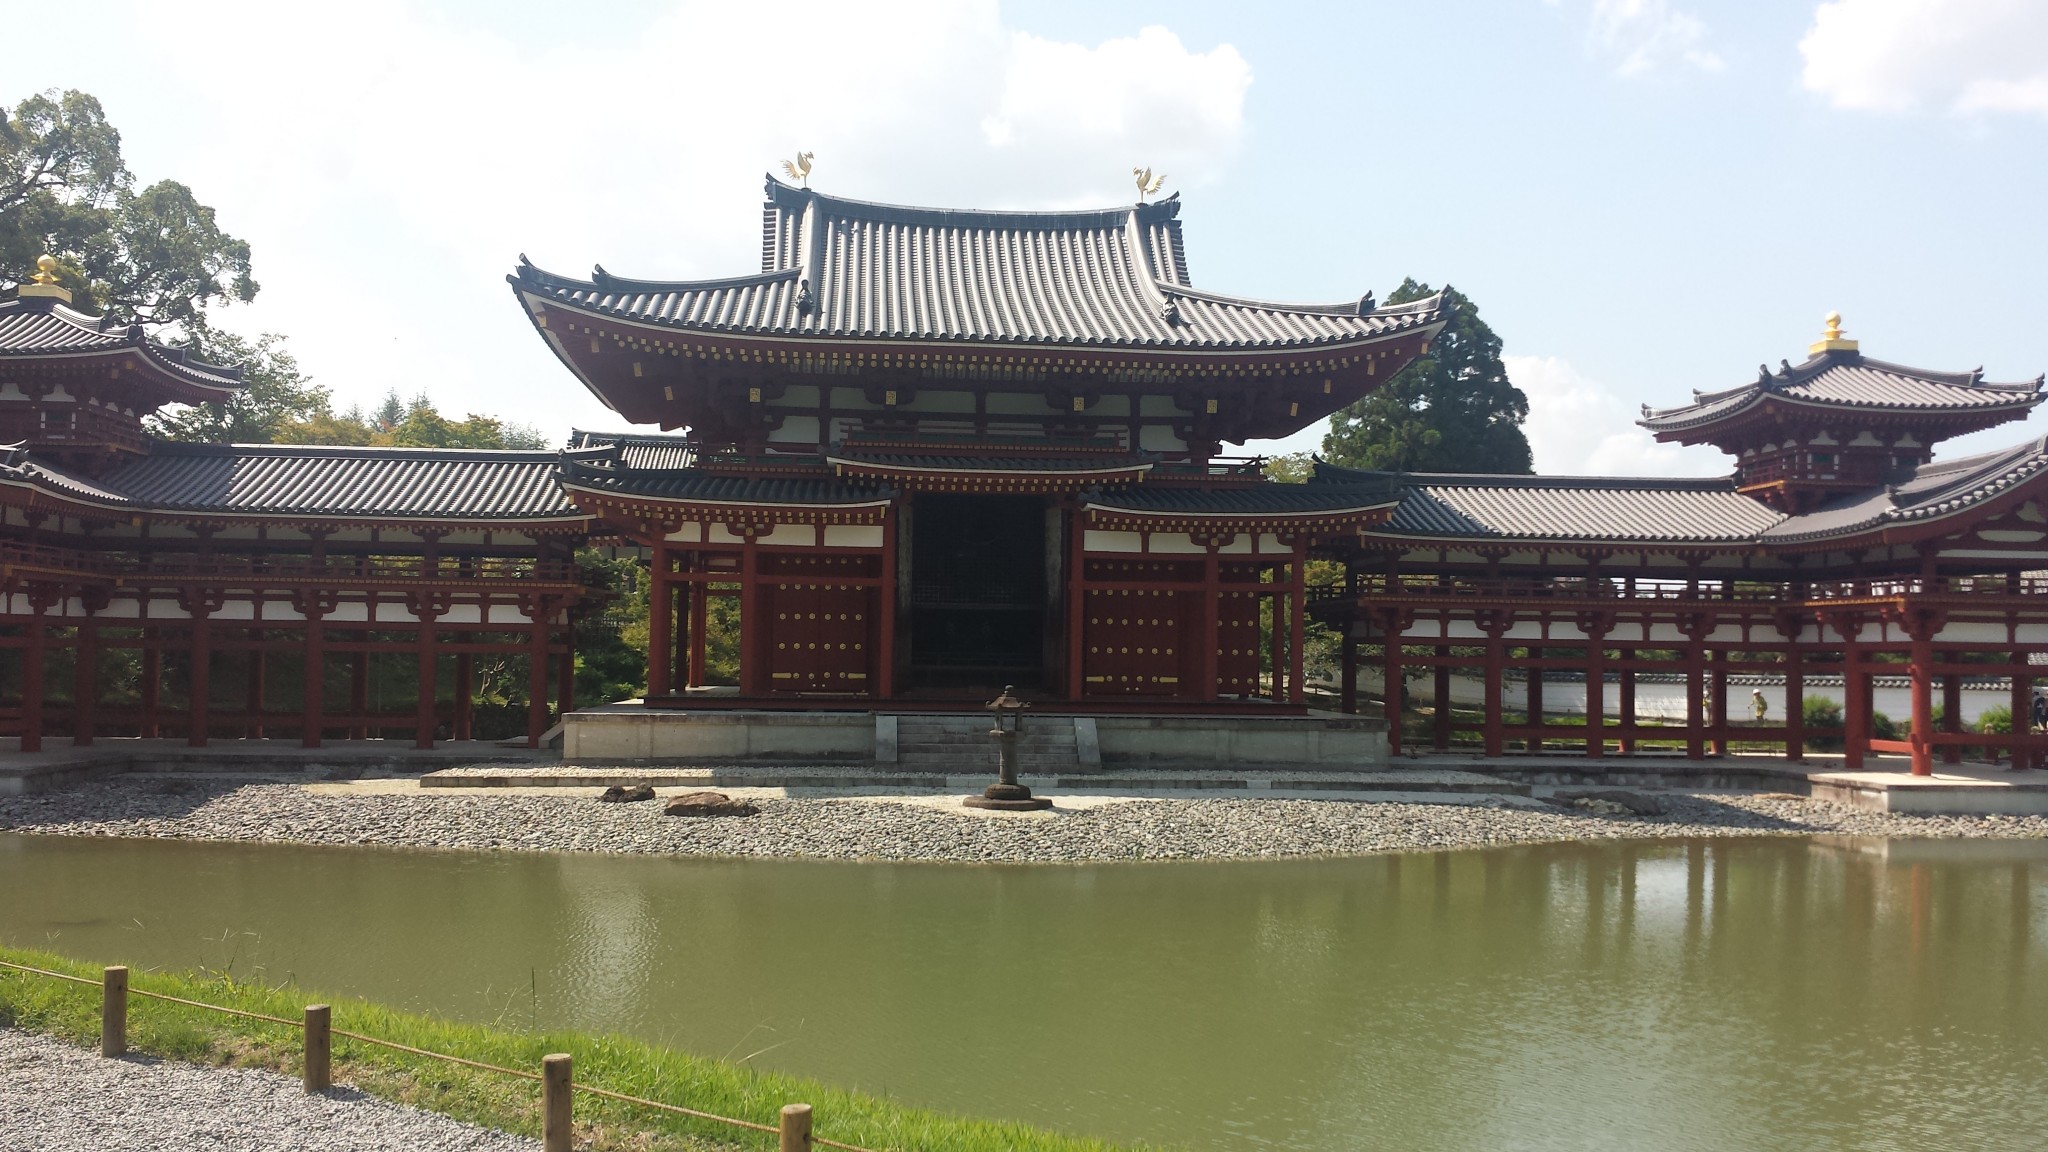 Uji city: visit the Byodoin temple on the 10 yen coin